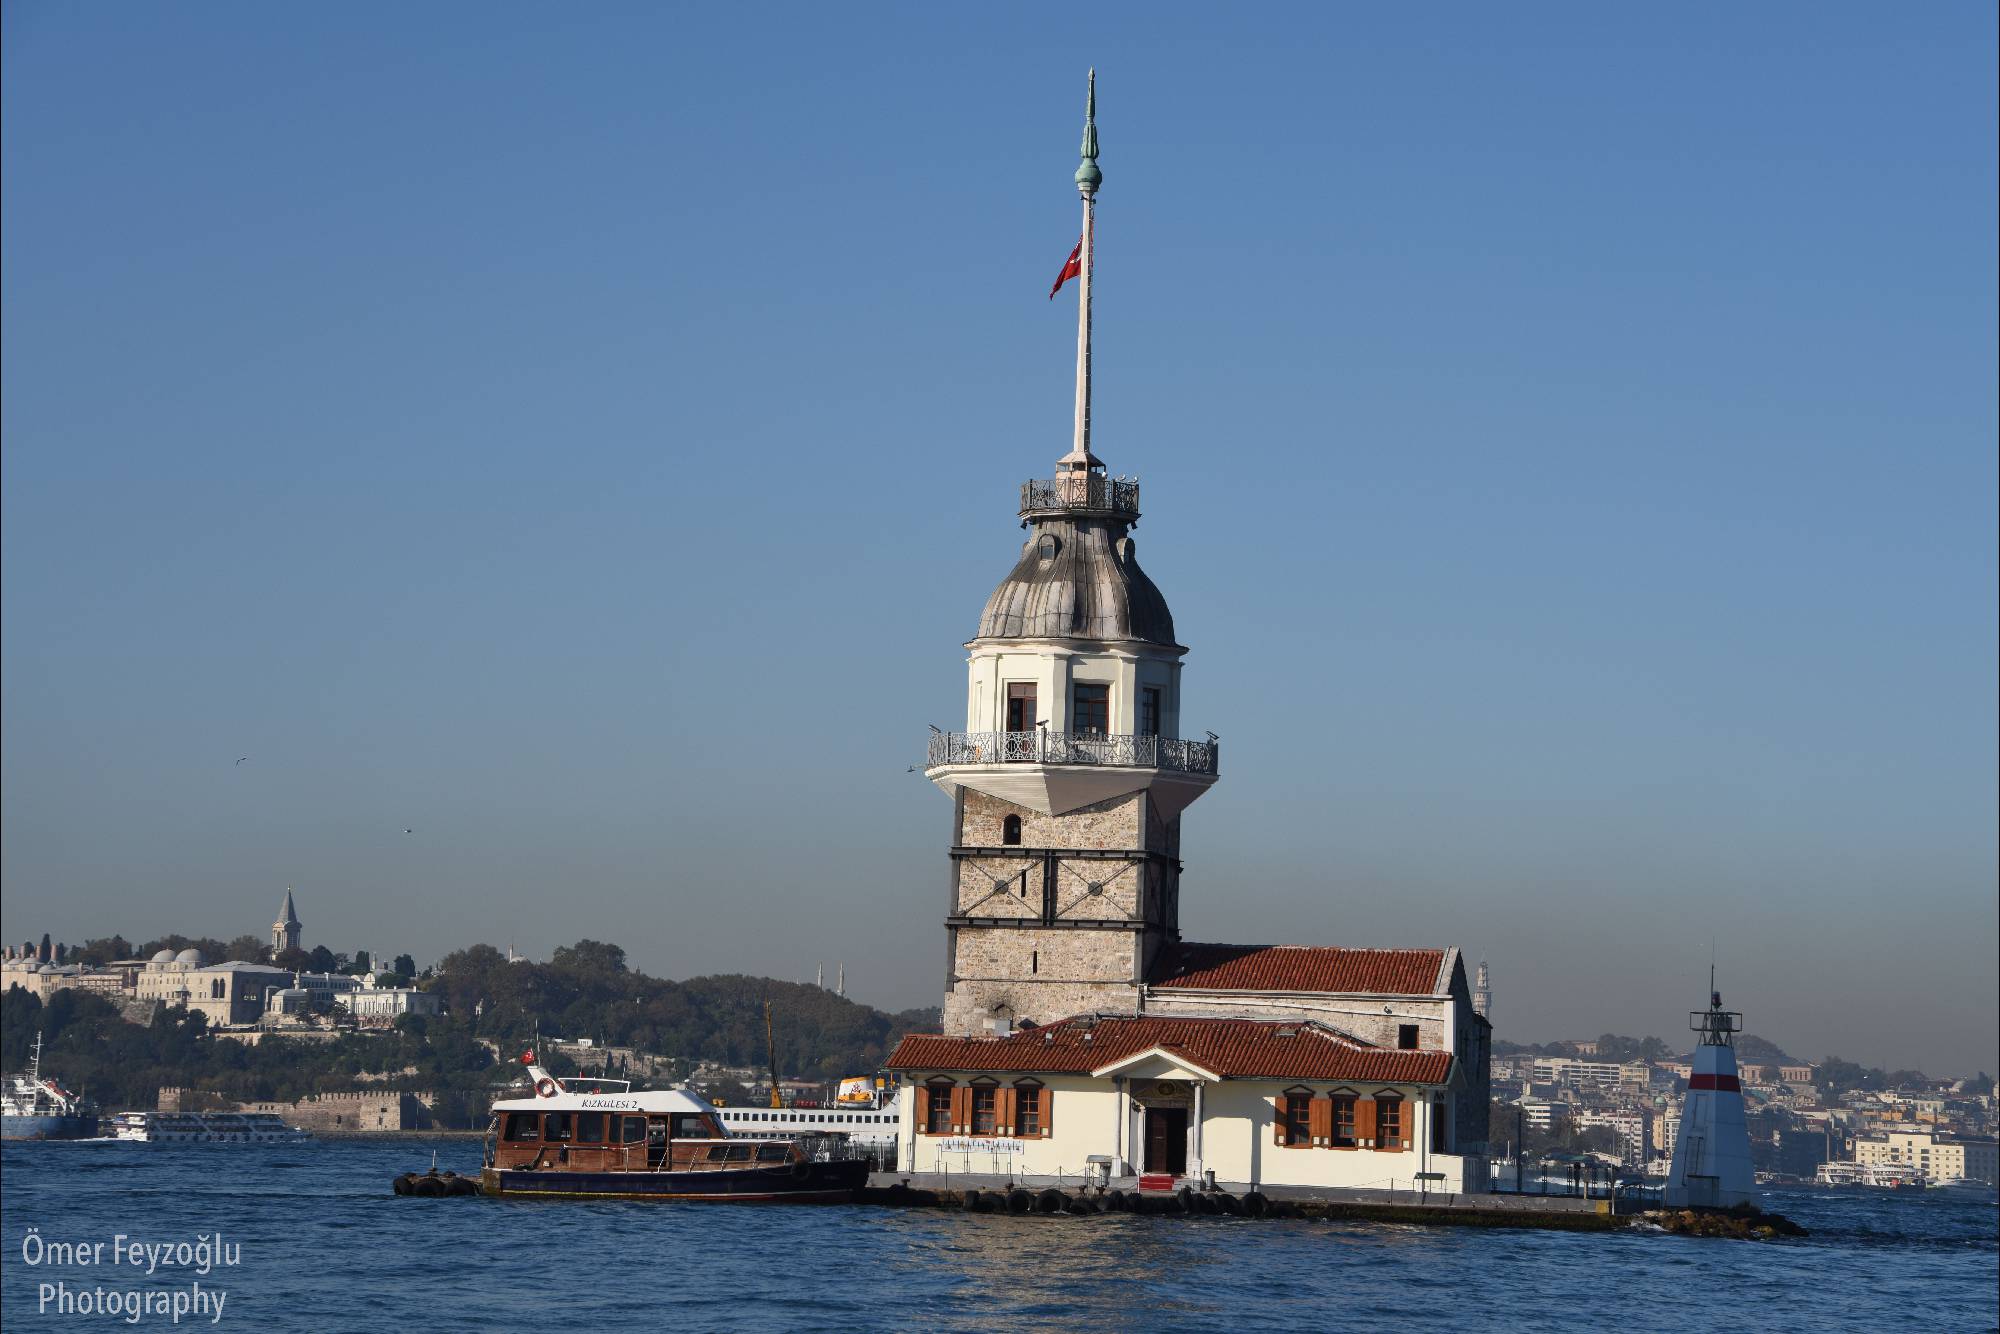 İstanbul gifts souvenirs online-İstanbul pictures